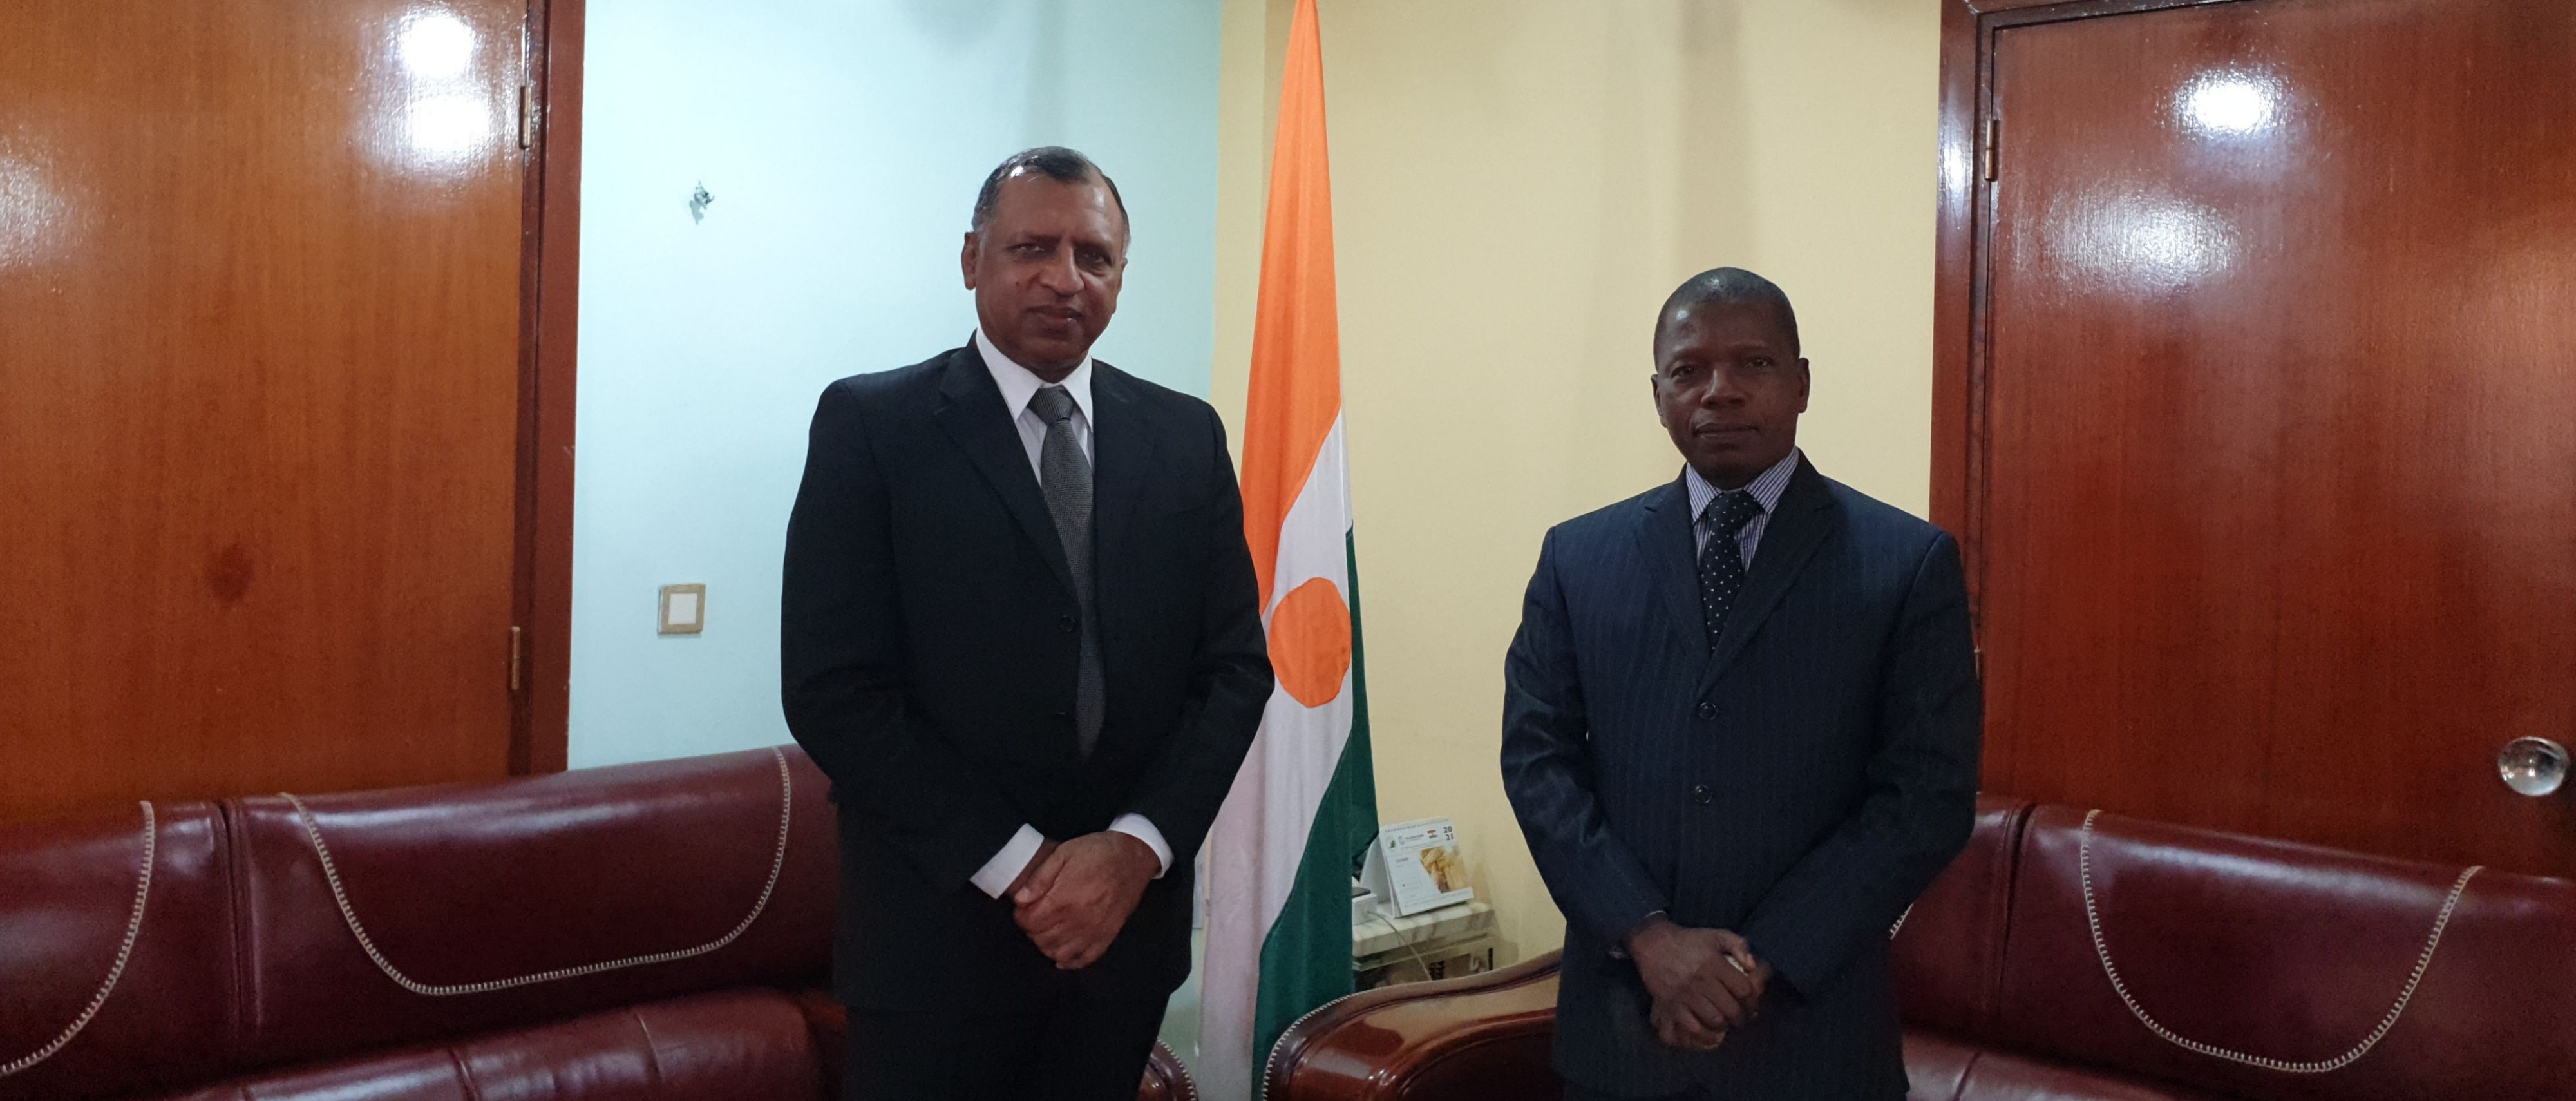  Ambassador Nair with the Minister of Planning of Niger, Dr. Rabiou Abdou